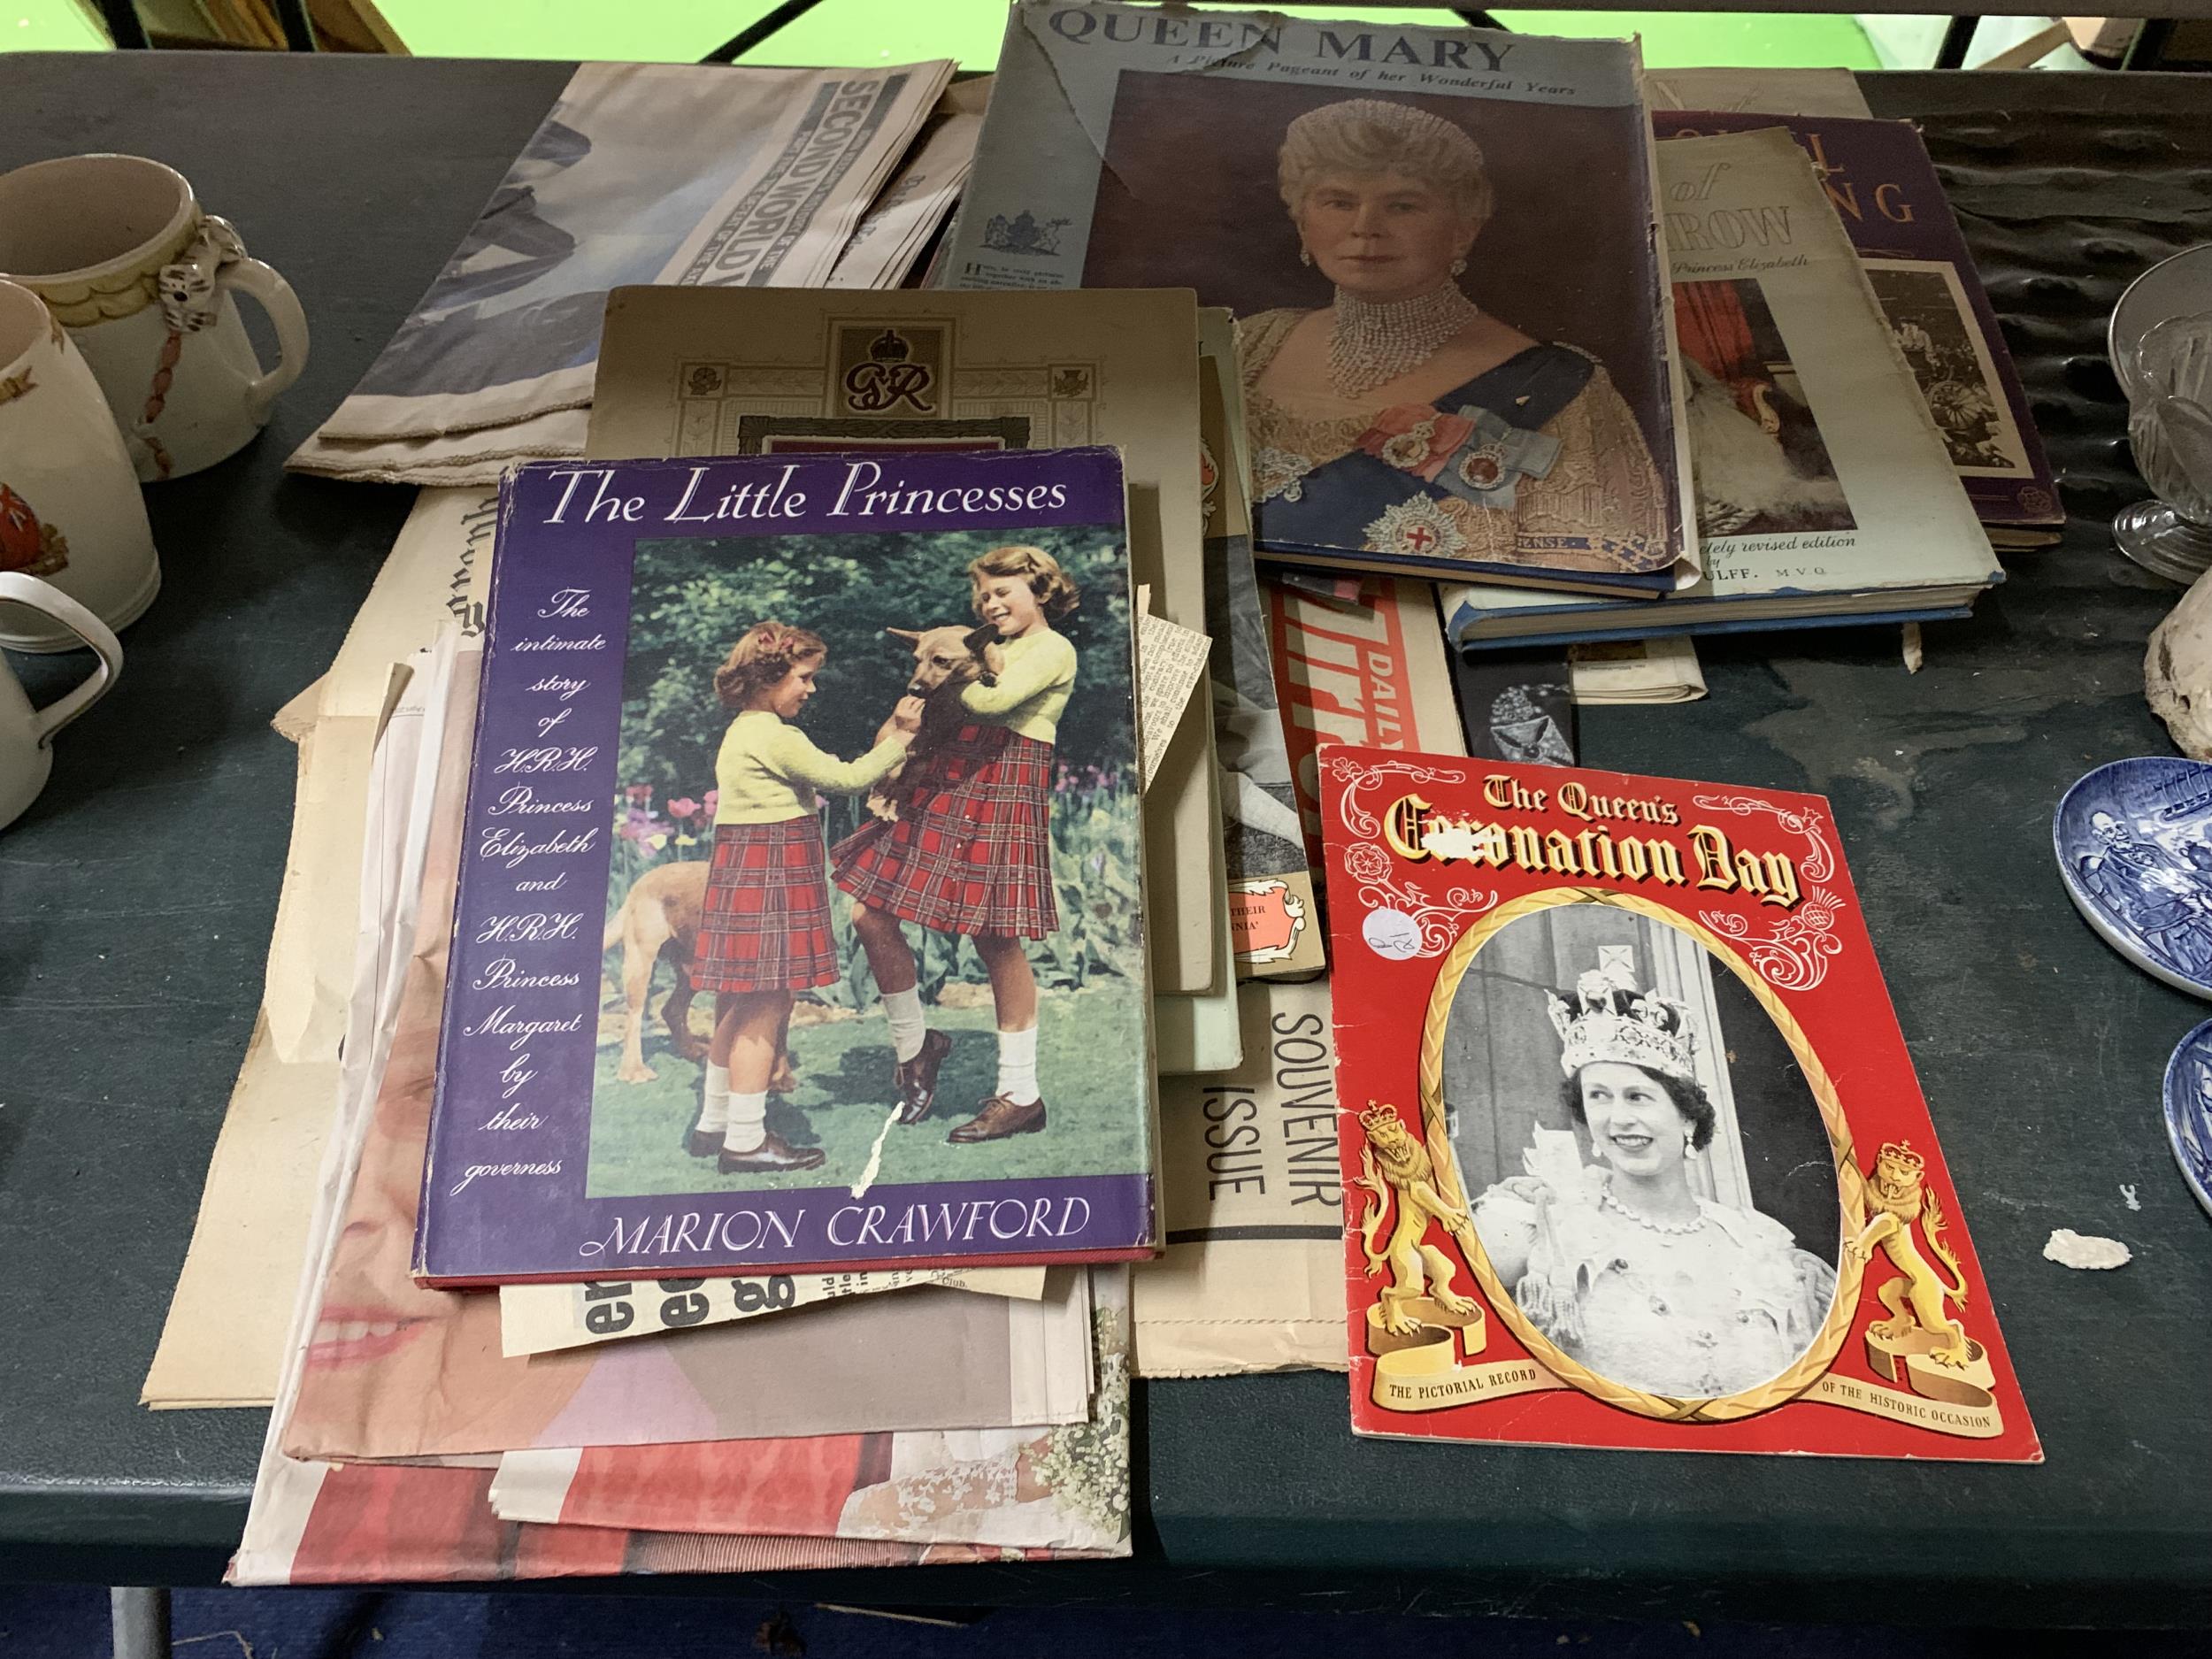 A QUANTITY OF VINTAGE NEWSPAPERS AND BOOKS RELATING TO THE ROYAL